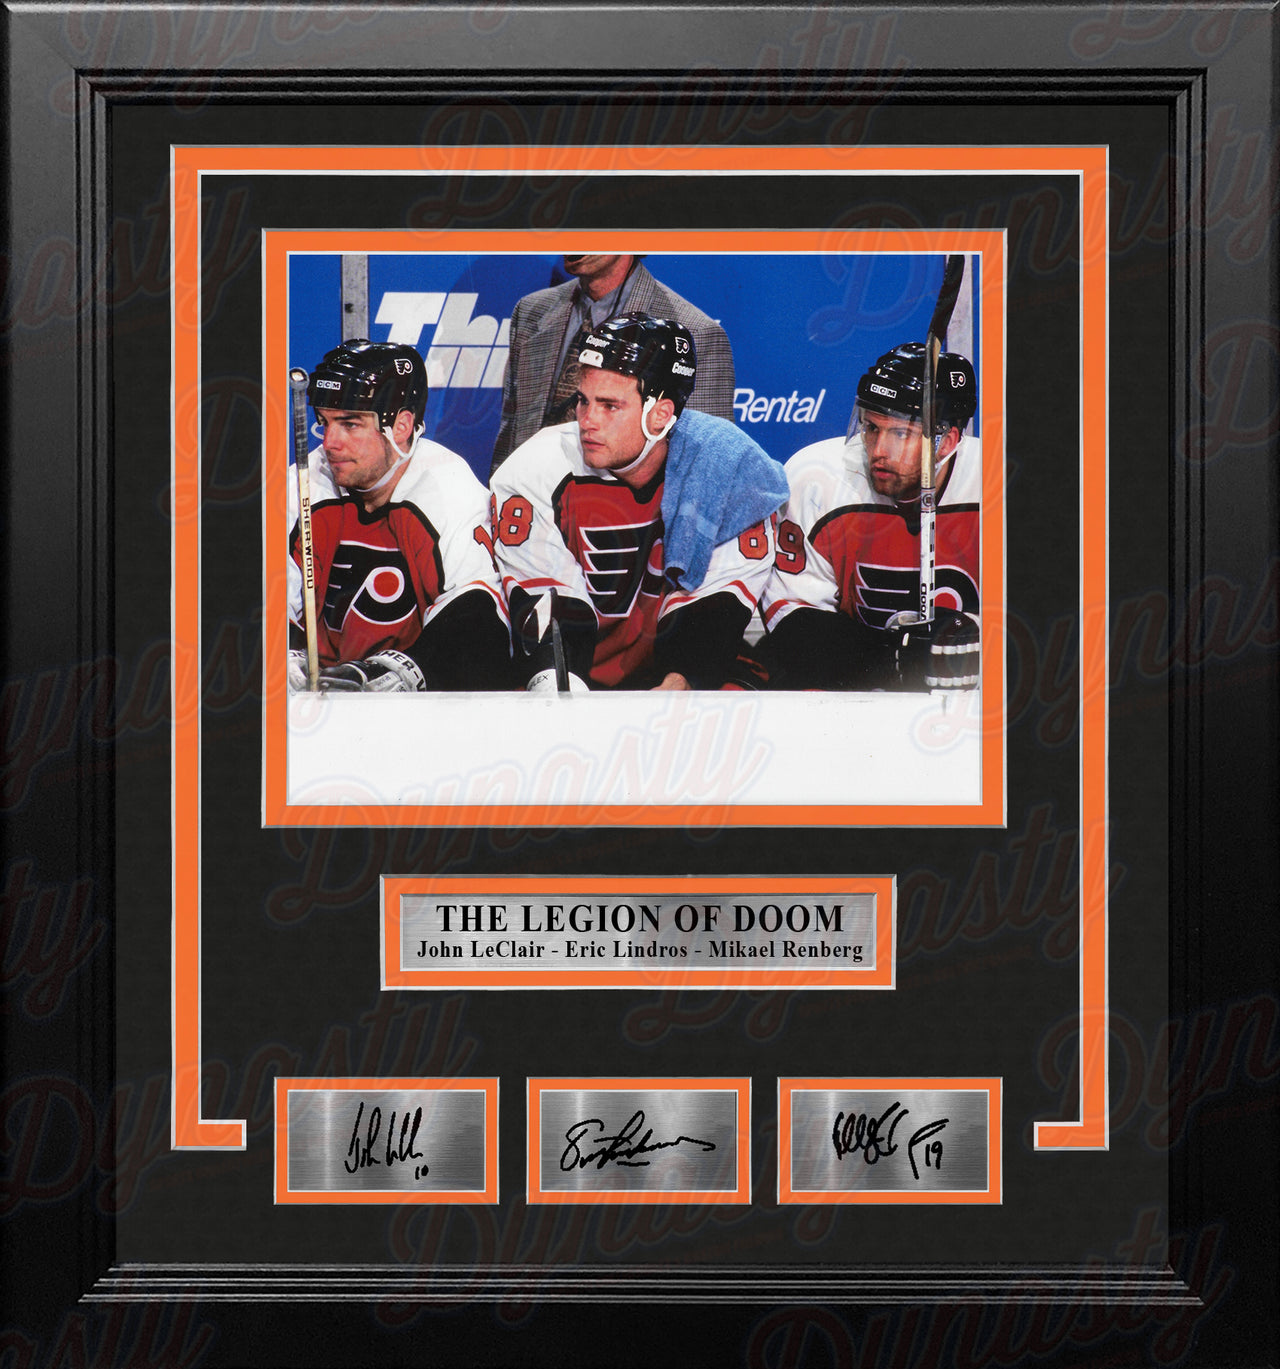 Legion of Doom Watching from the Bench Philadelphia Flyers Framed Hockey Photo with Engraved Autographs - Dynasty Sports & Framing 